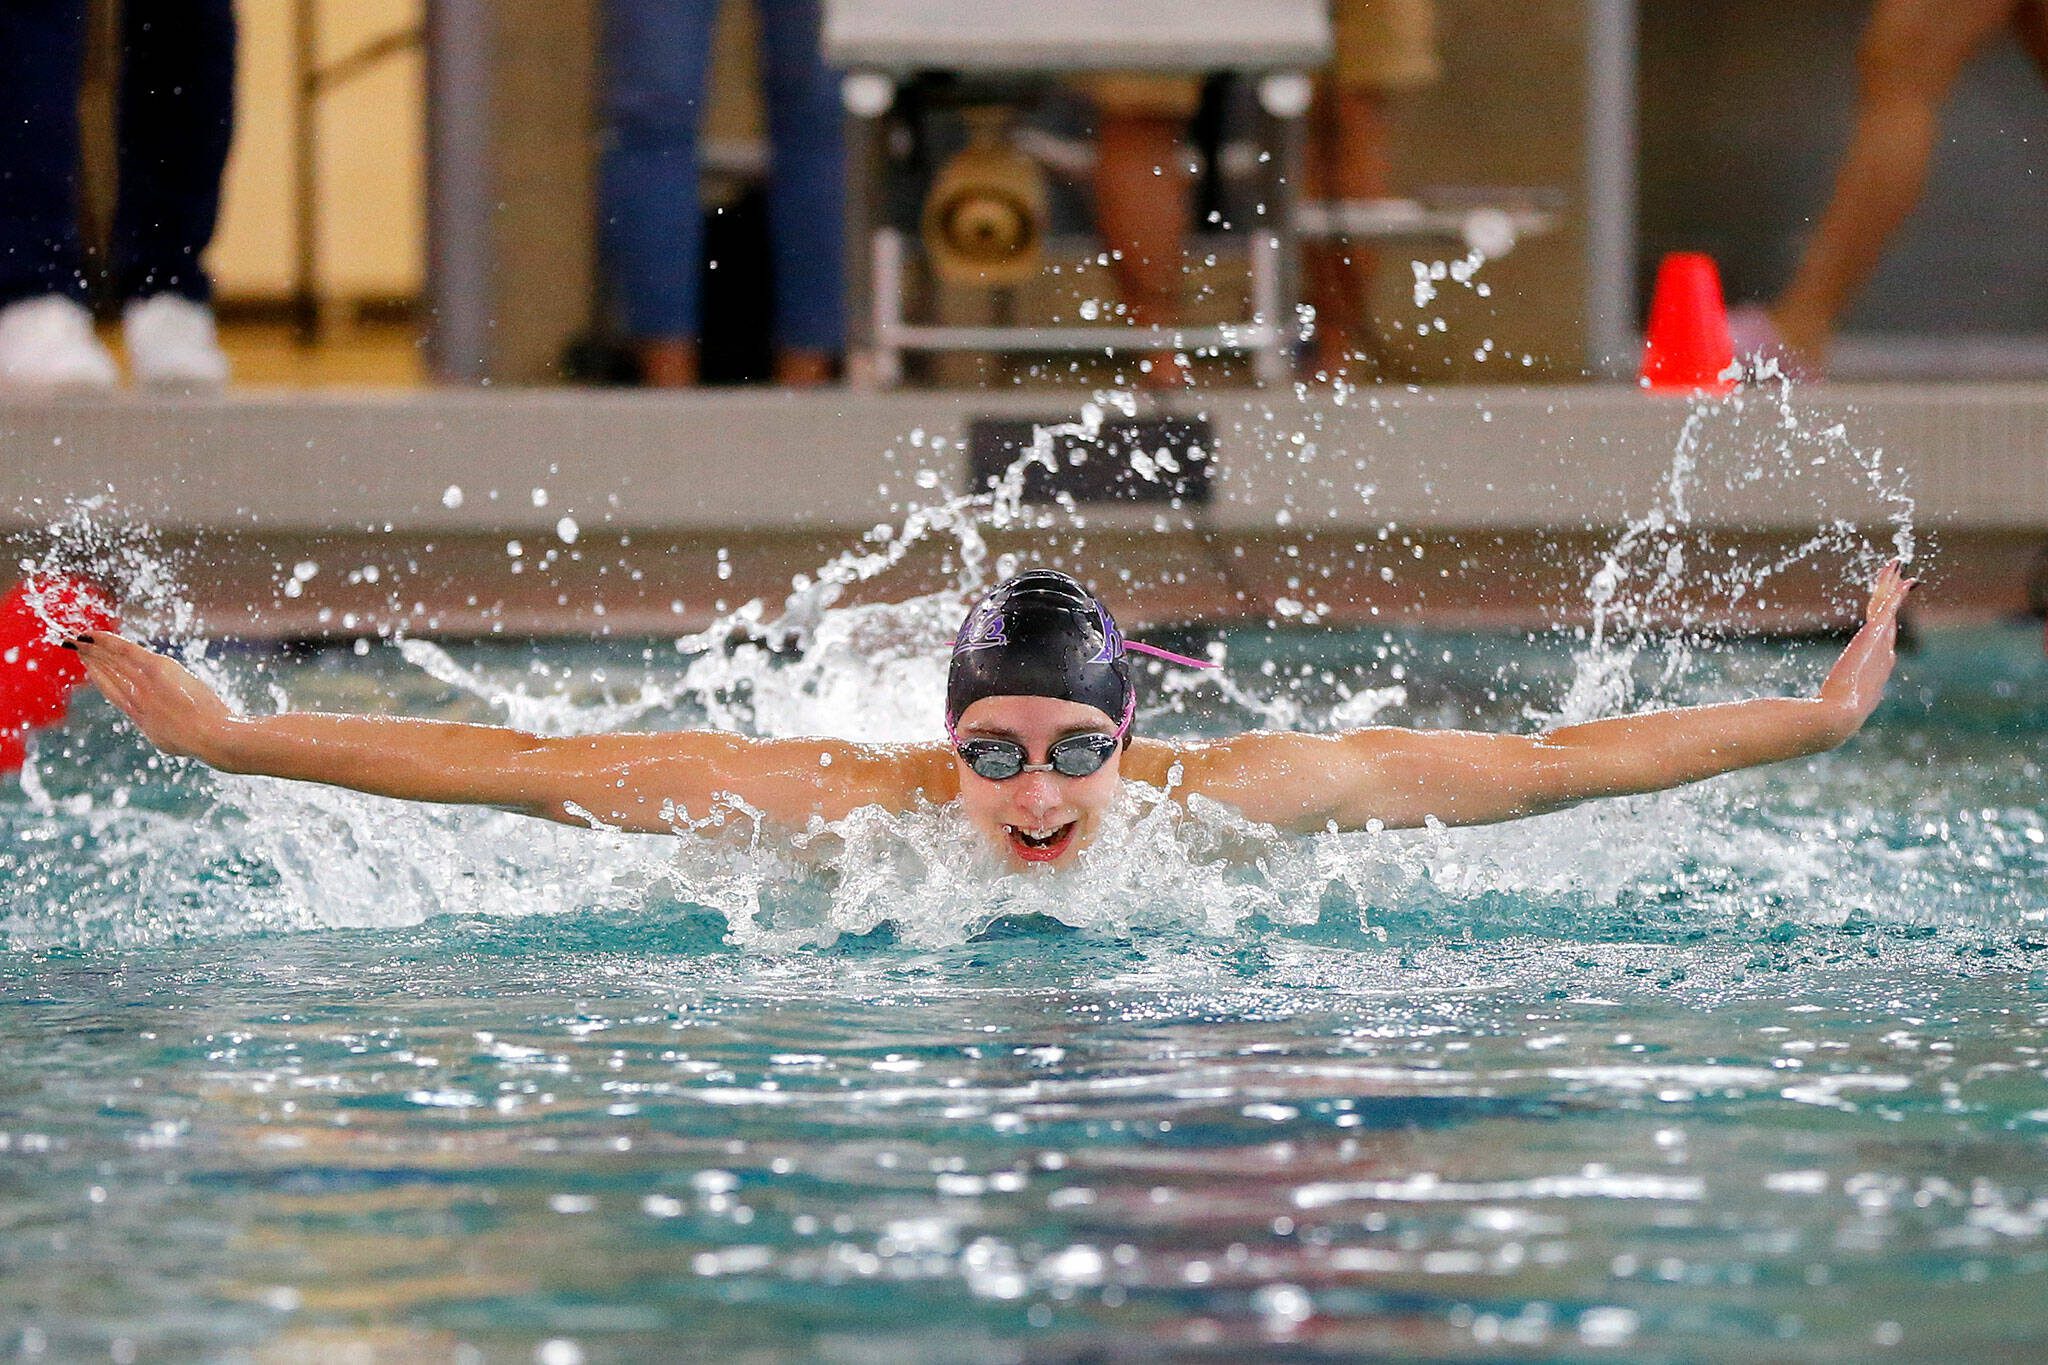 Kamiak senior Claire Smith swims her way to victory in the 100-yard butterfly during the Class 4A District 1 championships on Nov. 4 at the Snohomish Aquatic Center in Snohomish. (Ryan Berry / The Herald)